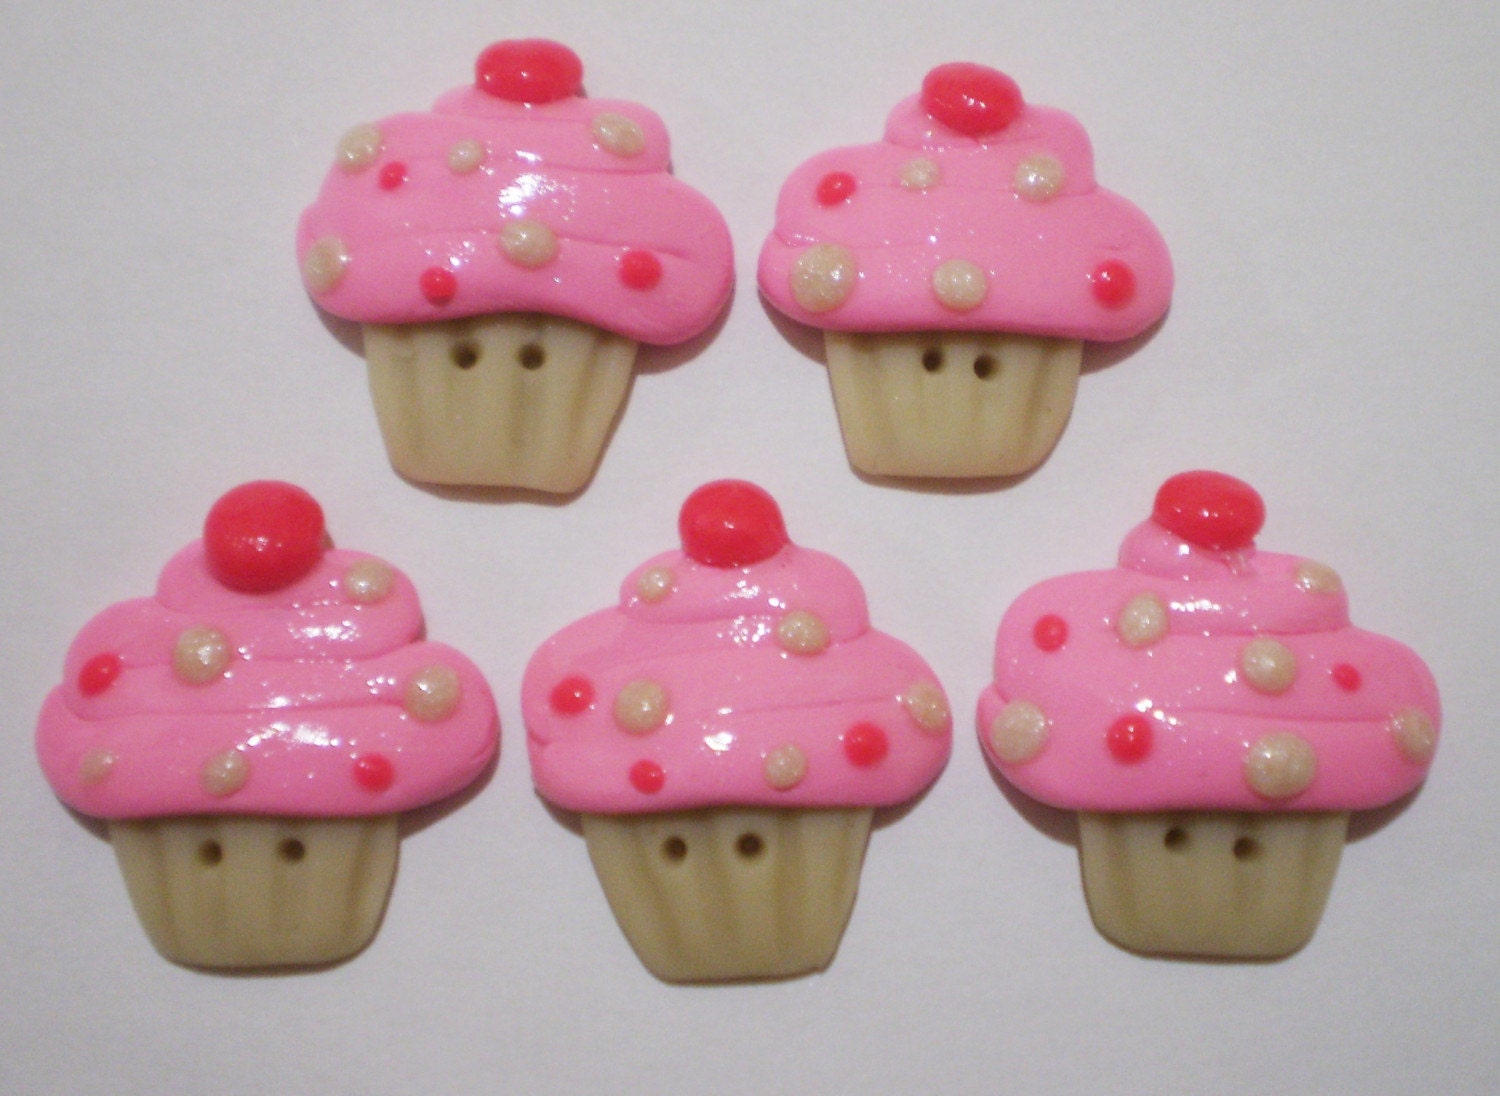 CUPCAKE handmade sculpey polymer clay deco buttons x 5 - for scrapbooking or card making